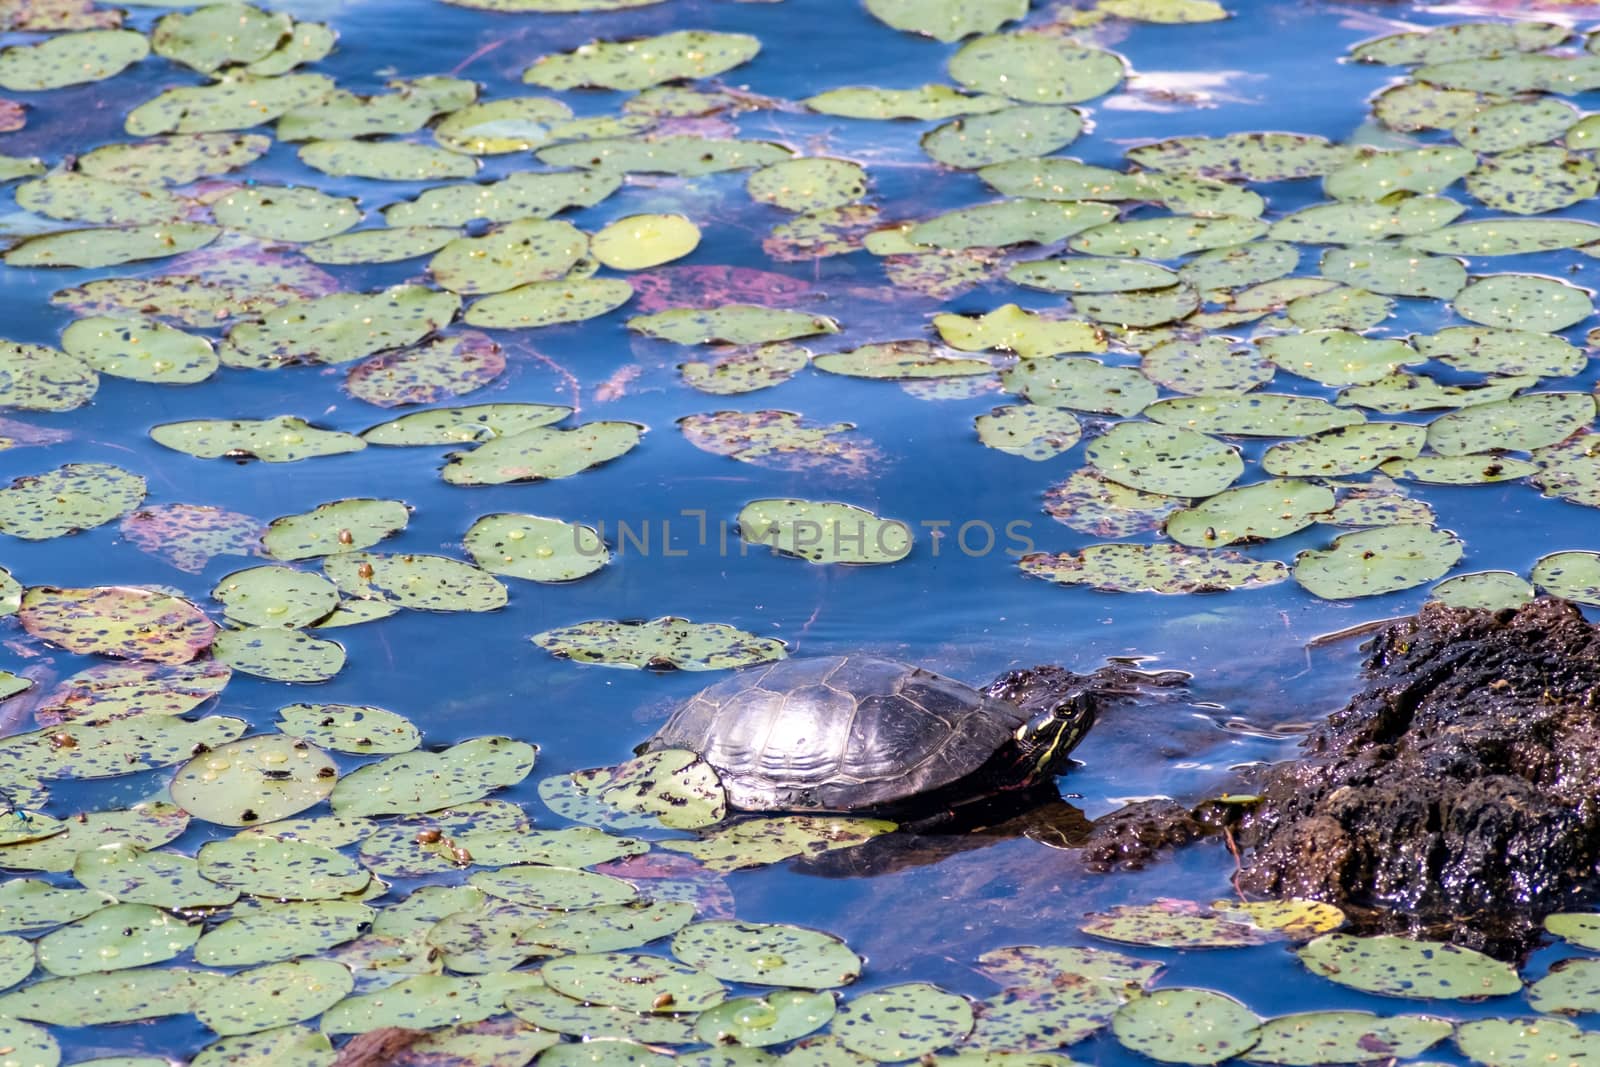 A painted turtle rests in the sun on a rock in the water of a pond, surrounded by lily pads.